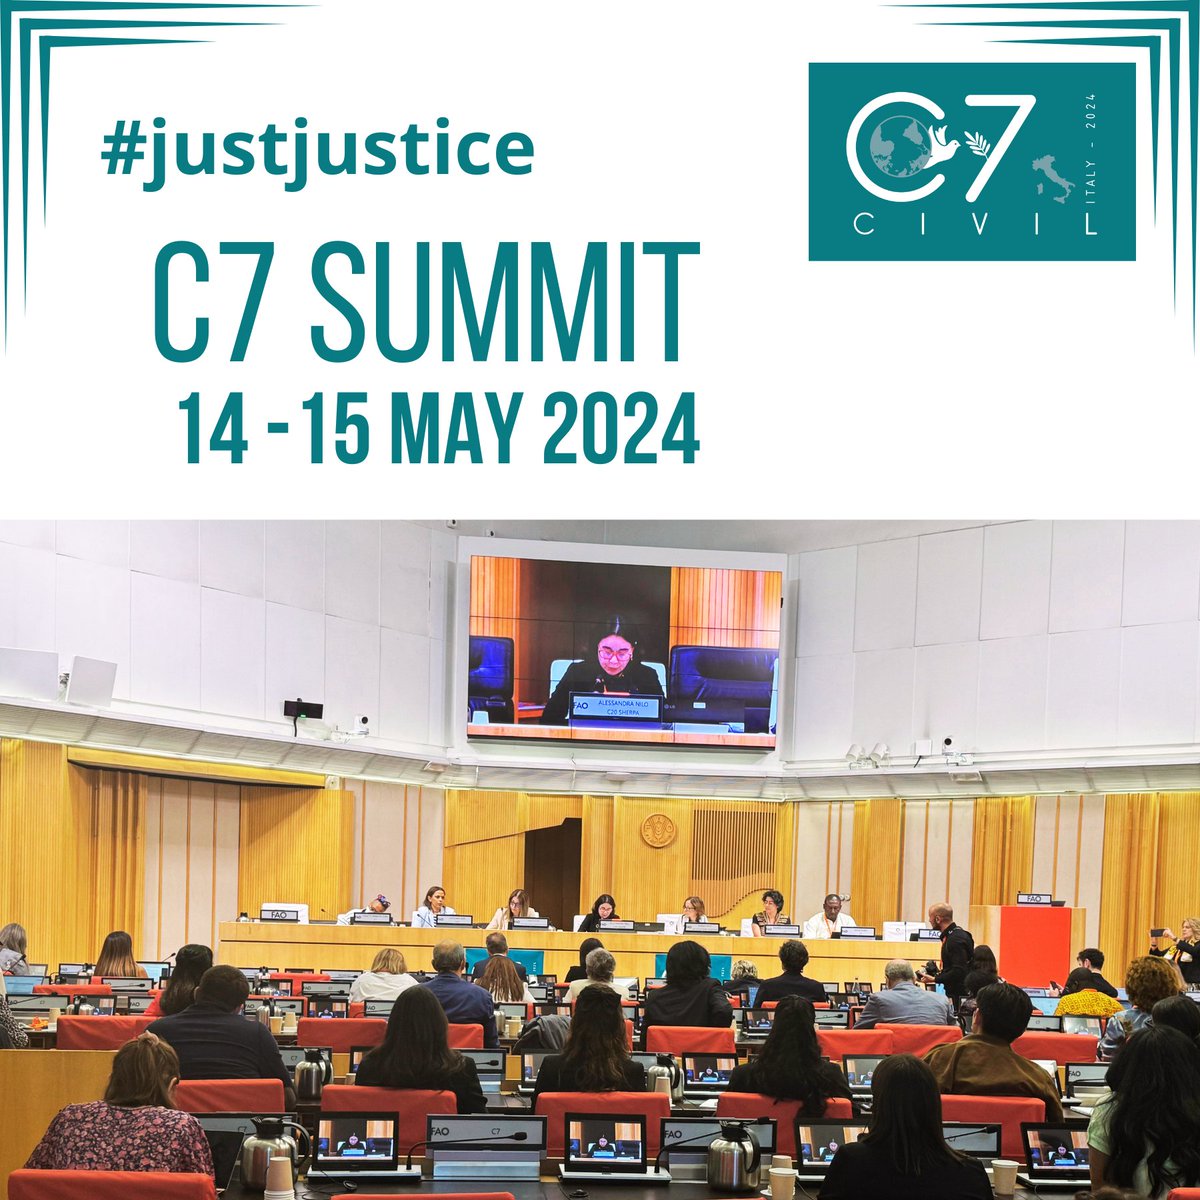 #JustJustice The first exciting day of the C7 Summit now comes to an end. See you tomorrow and 𝗦𝗧𝗔𝗬 𝗧𝗨𝗡𝗘𝗗! 

#civil7, #civil7Italy, #civil7ITA, #G7ITA, #g72024